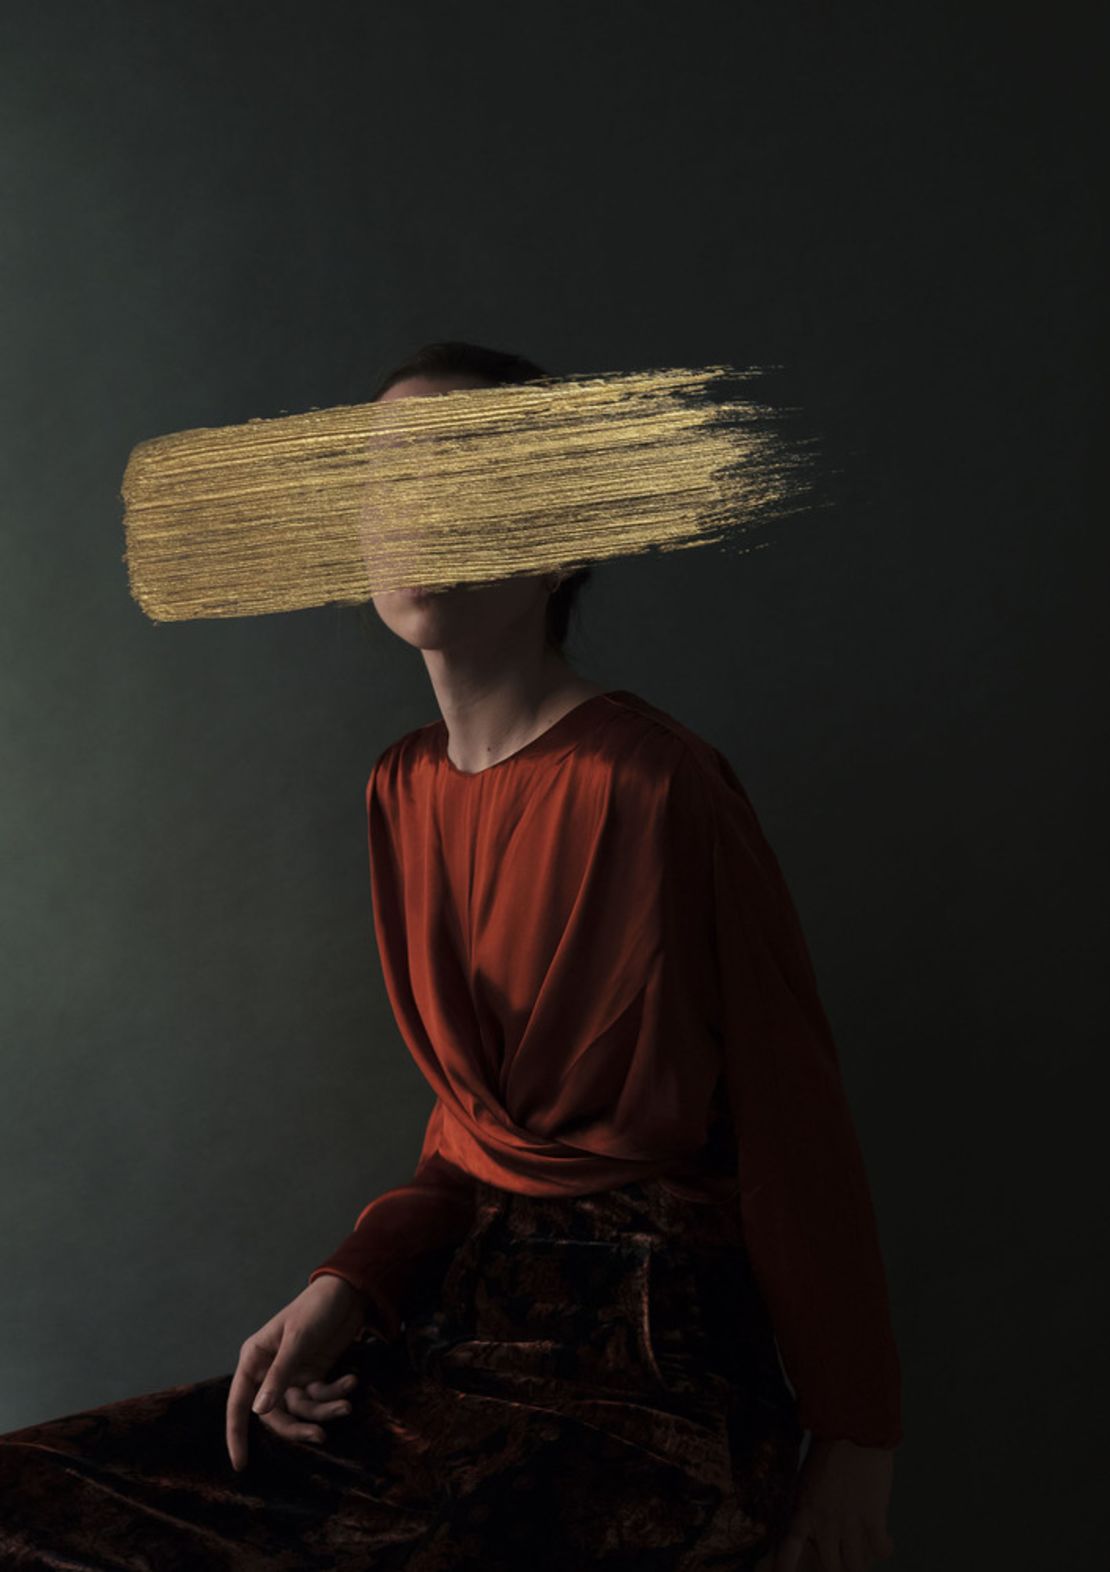 "Persimmon, The unknown" (2018) by Andrea Torres Balaguer.